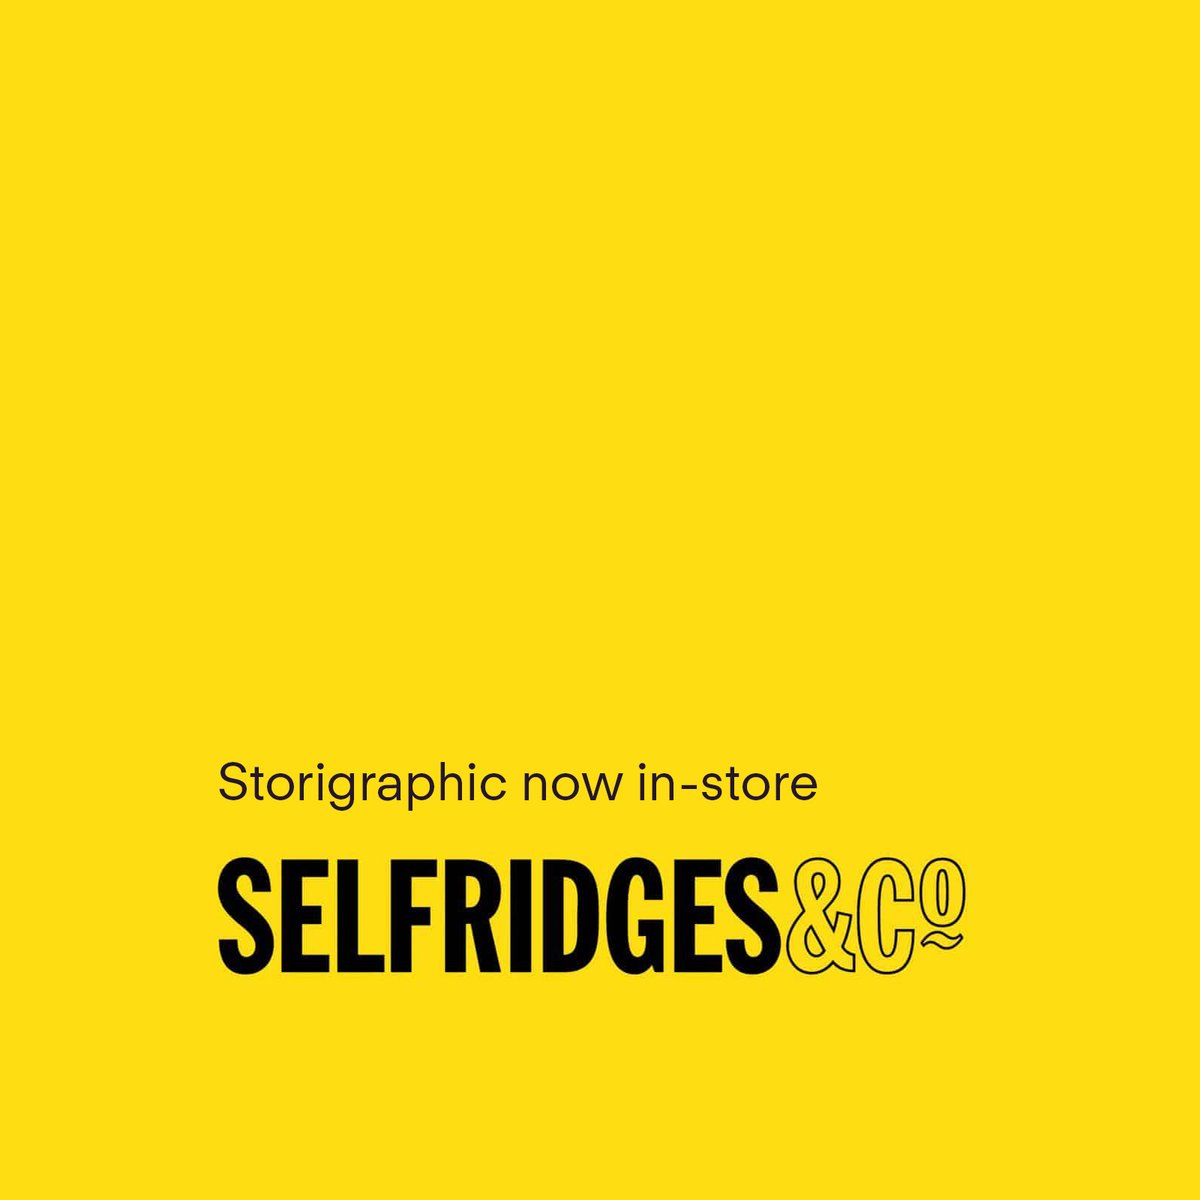 We have some especially exciting news to share — a selection of our wrapping papers is now stocked by Selfridges, and can be found in-store.

Read our full journal post: storigraphic.com/blogs/journal/…

#selfridgeschristmas #storigraphic #wrappingpaper #giftwrap #christmaswrap